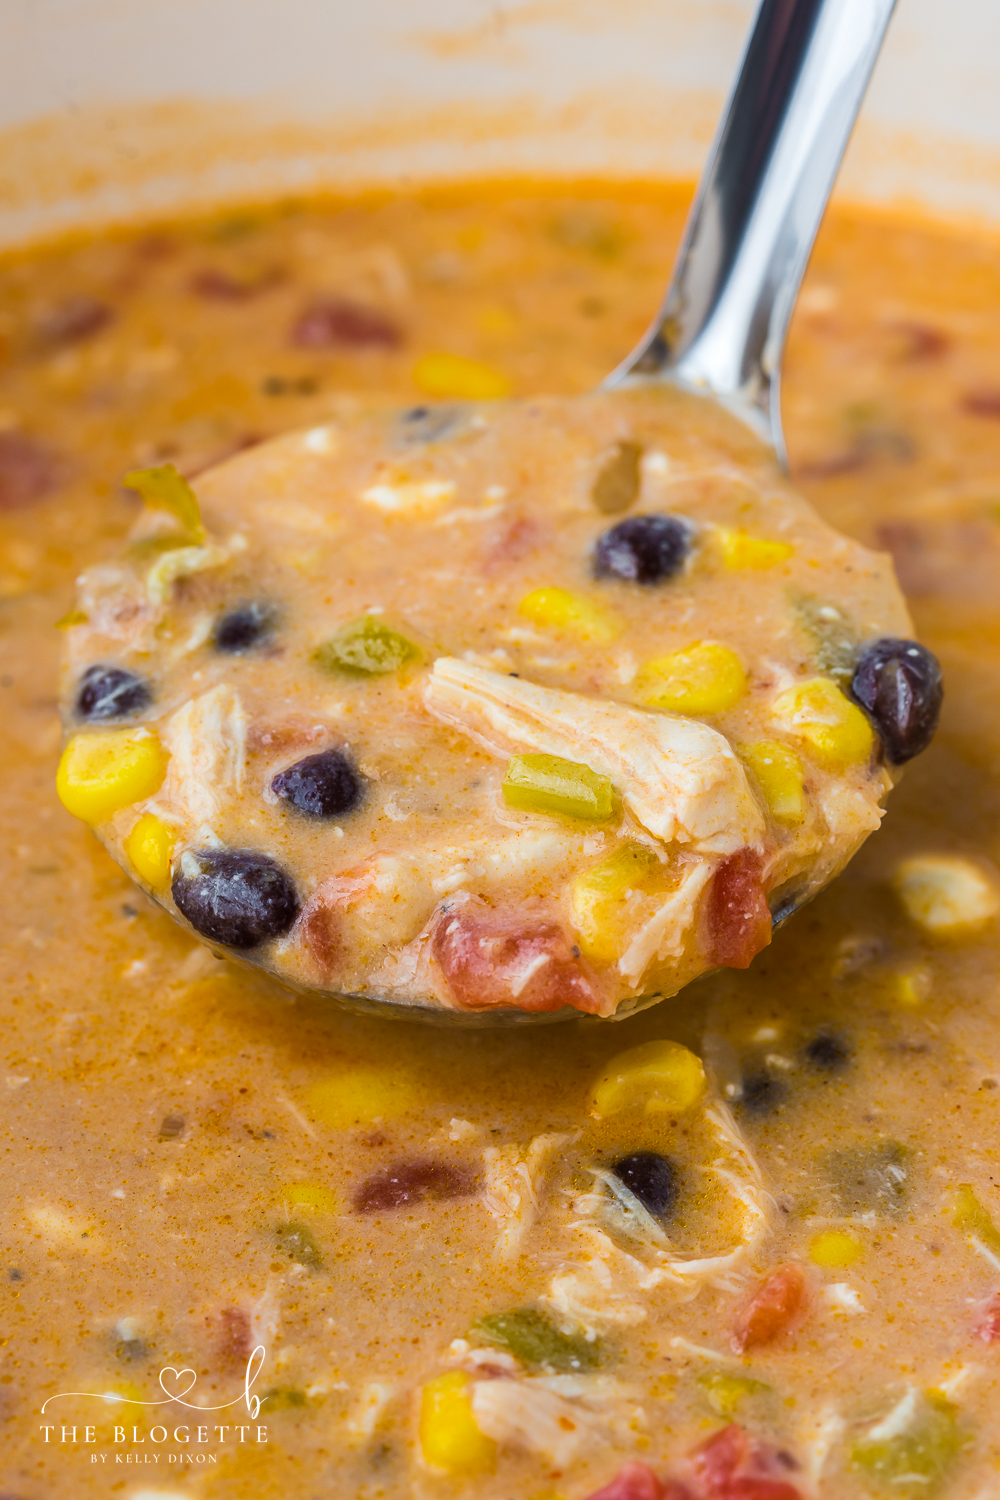 This Chicken Enchilada Soup can be made on the Stove Top or the Crock-Pot and is easy to make with chicken breast, thighs, rotisserie chicken, or leftover chicken! This delicious chicken enchilada soup is thick, cheesy, and ready to go in just 20 minutes!